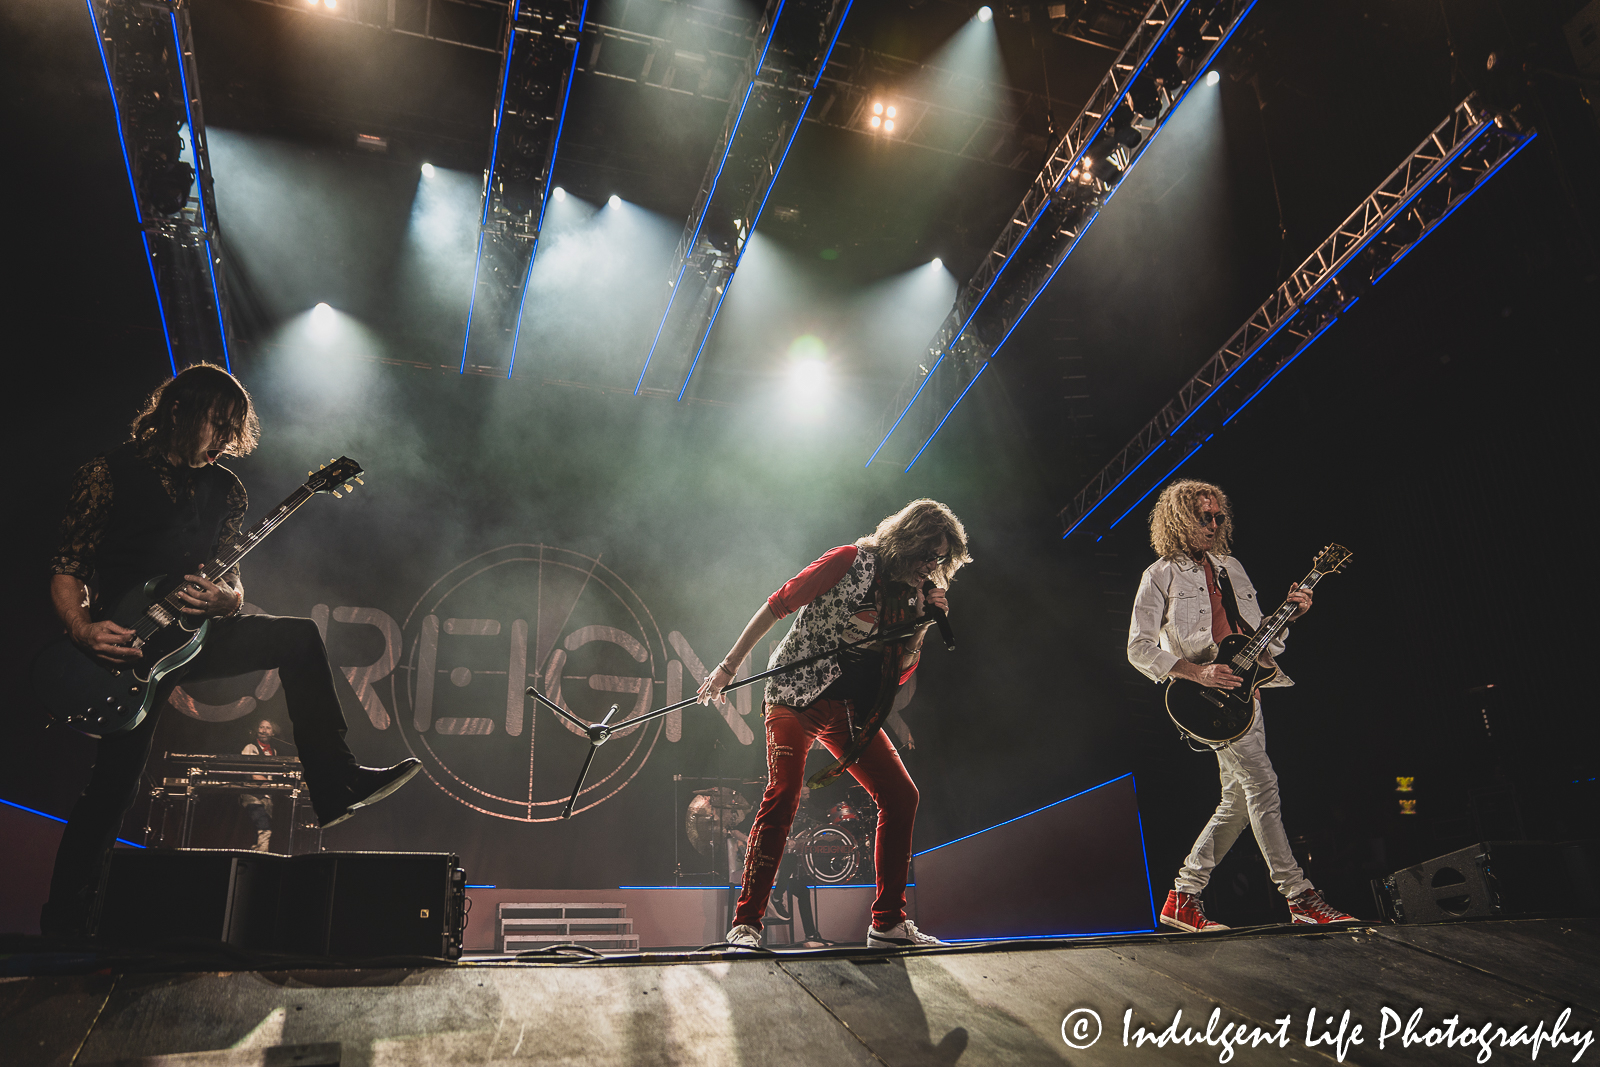 Foreigner band members Luis Maldonado, Kelly Hansen and Bruce Watson performing together at Starlight Theatre in Kansas City, MO on July 18, 2023.